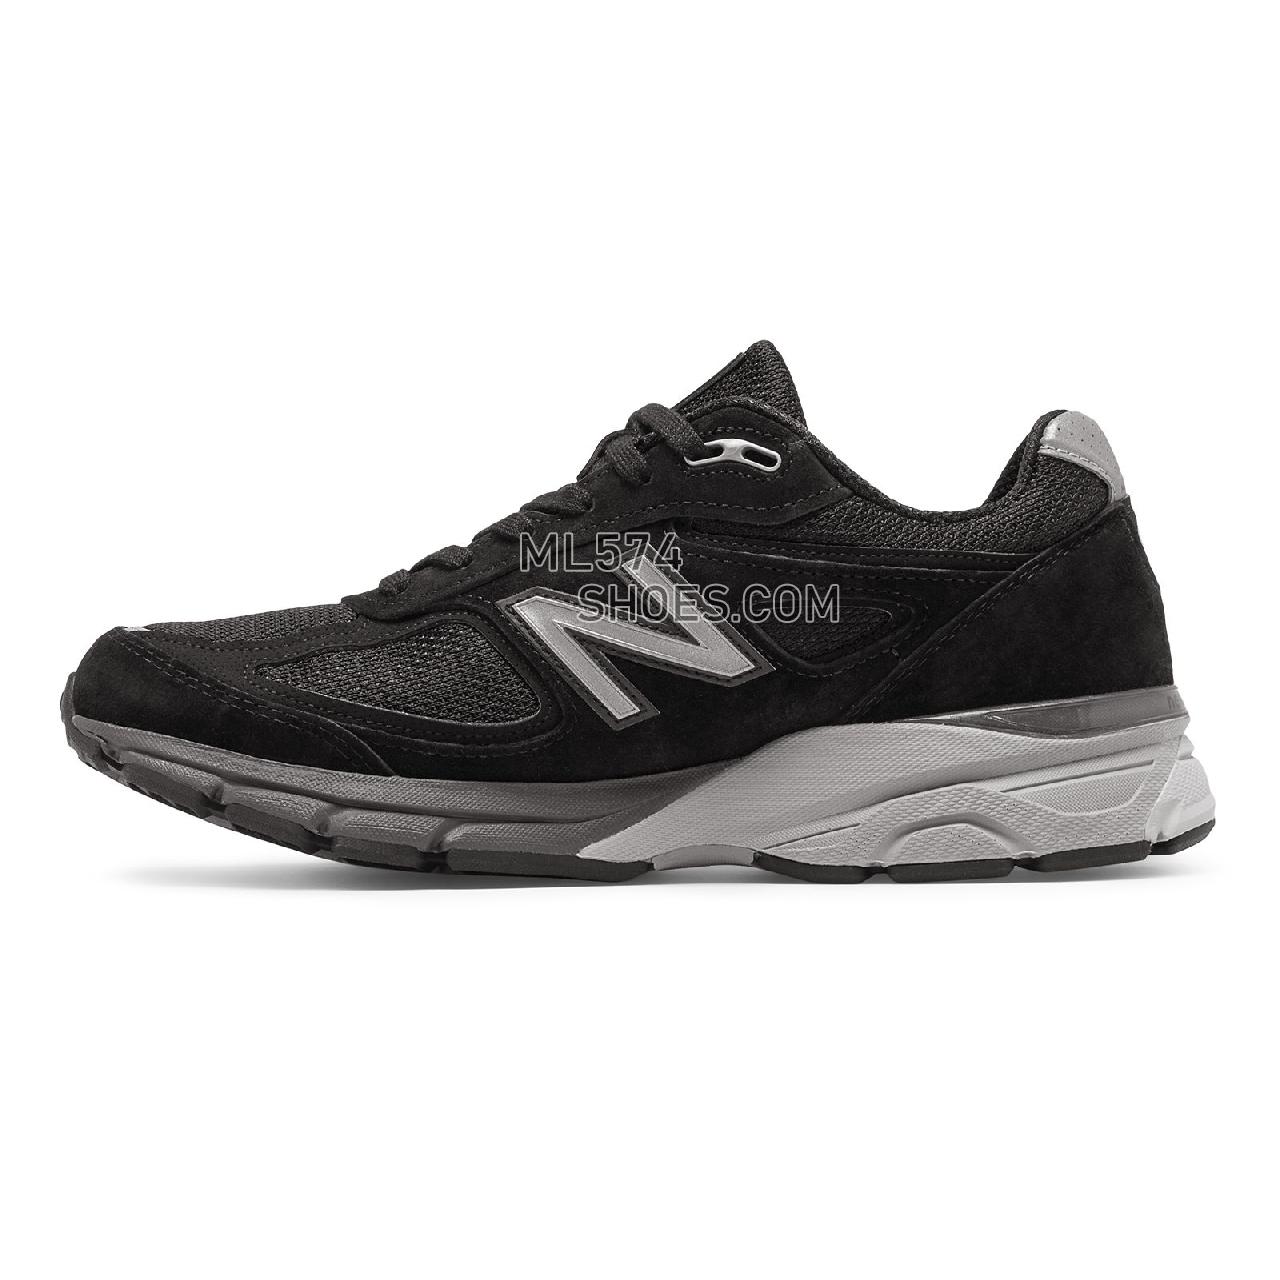 New Balance Mens 990v4 Made in US - Men's 990 - Running Black with Silver - M990BK4